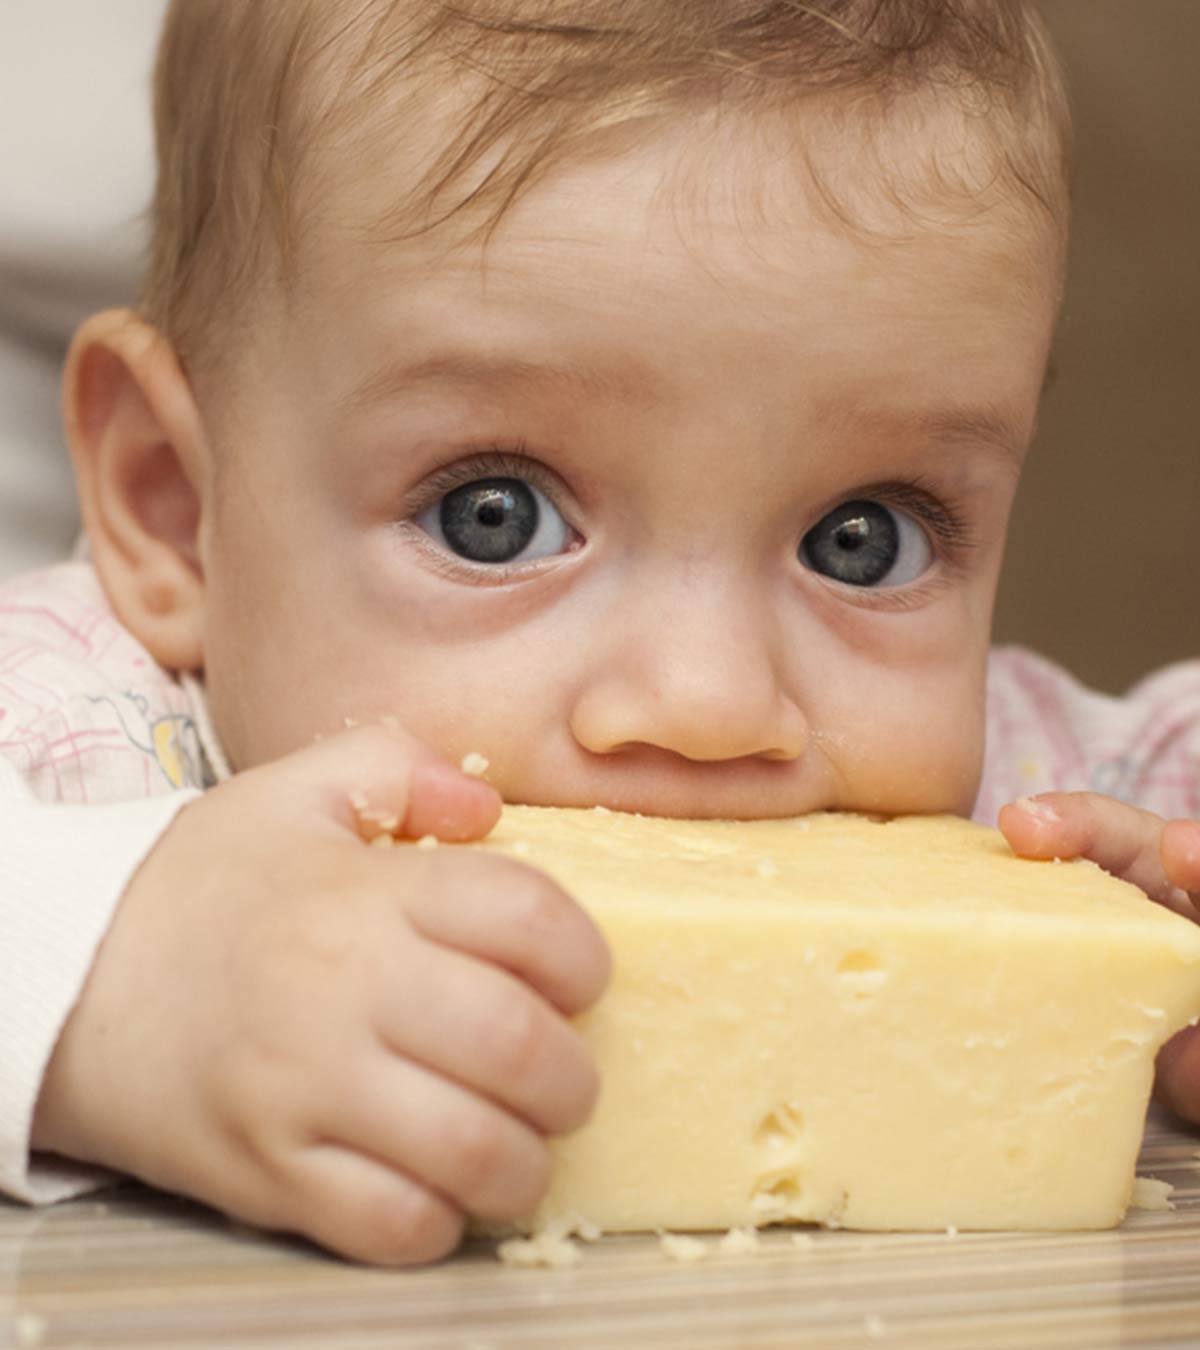 Cheese For Babies: When To Introduce, Benefits And Recipes